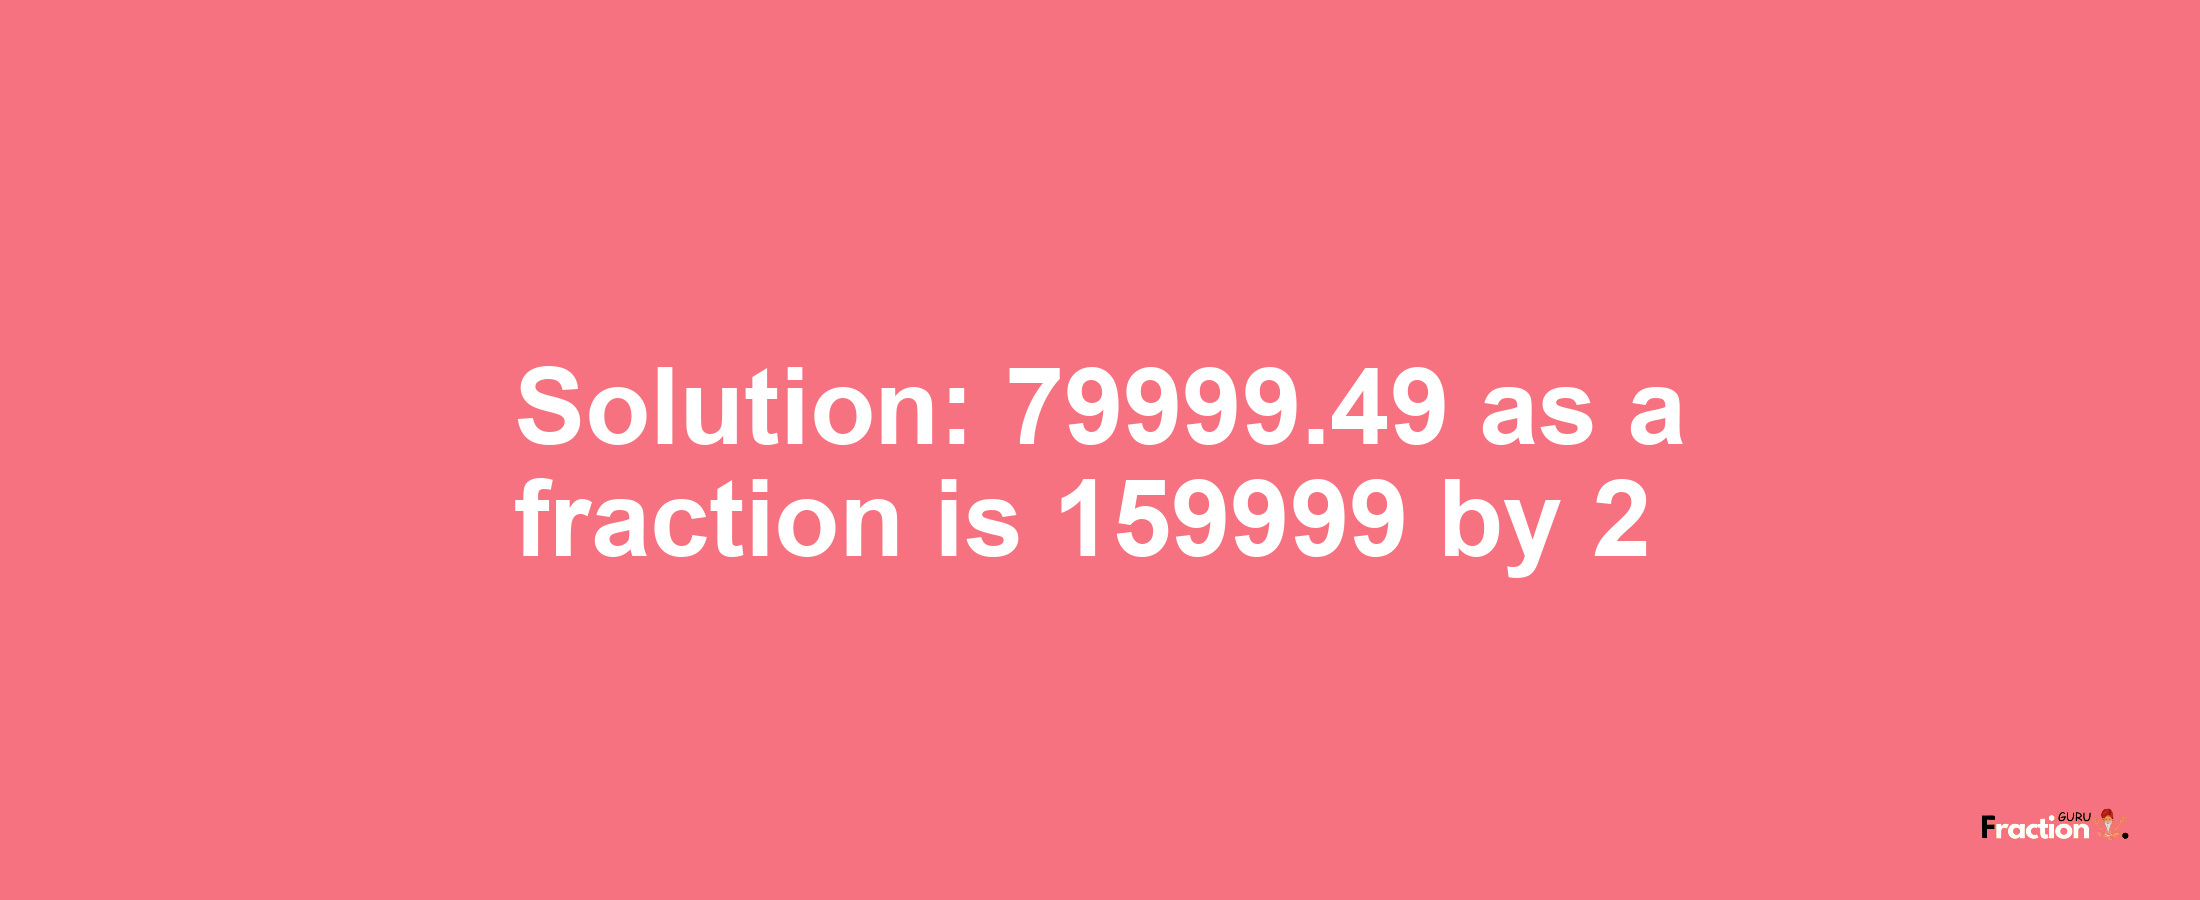 Solution:79999.49 as a fraction is 159999/2